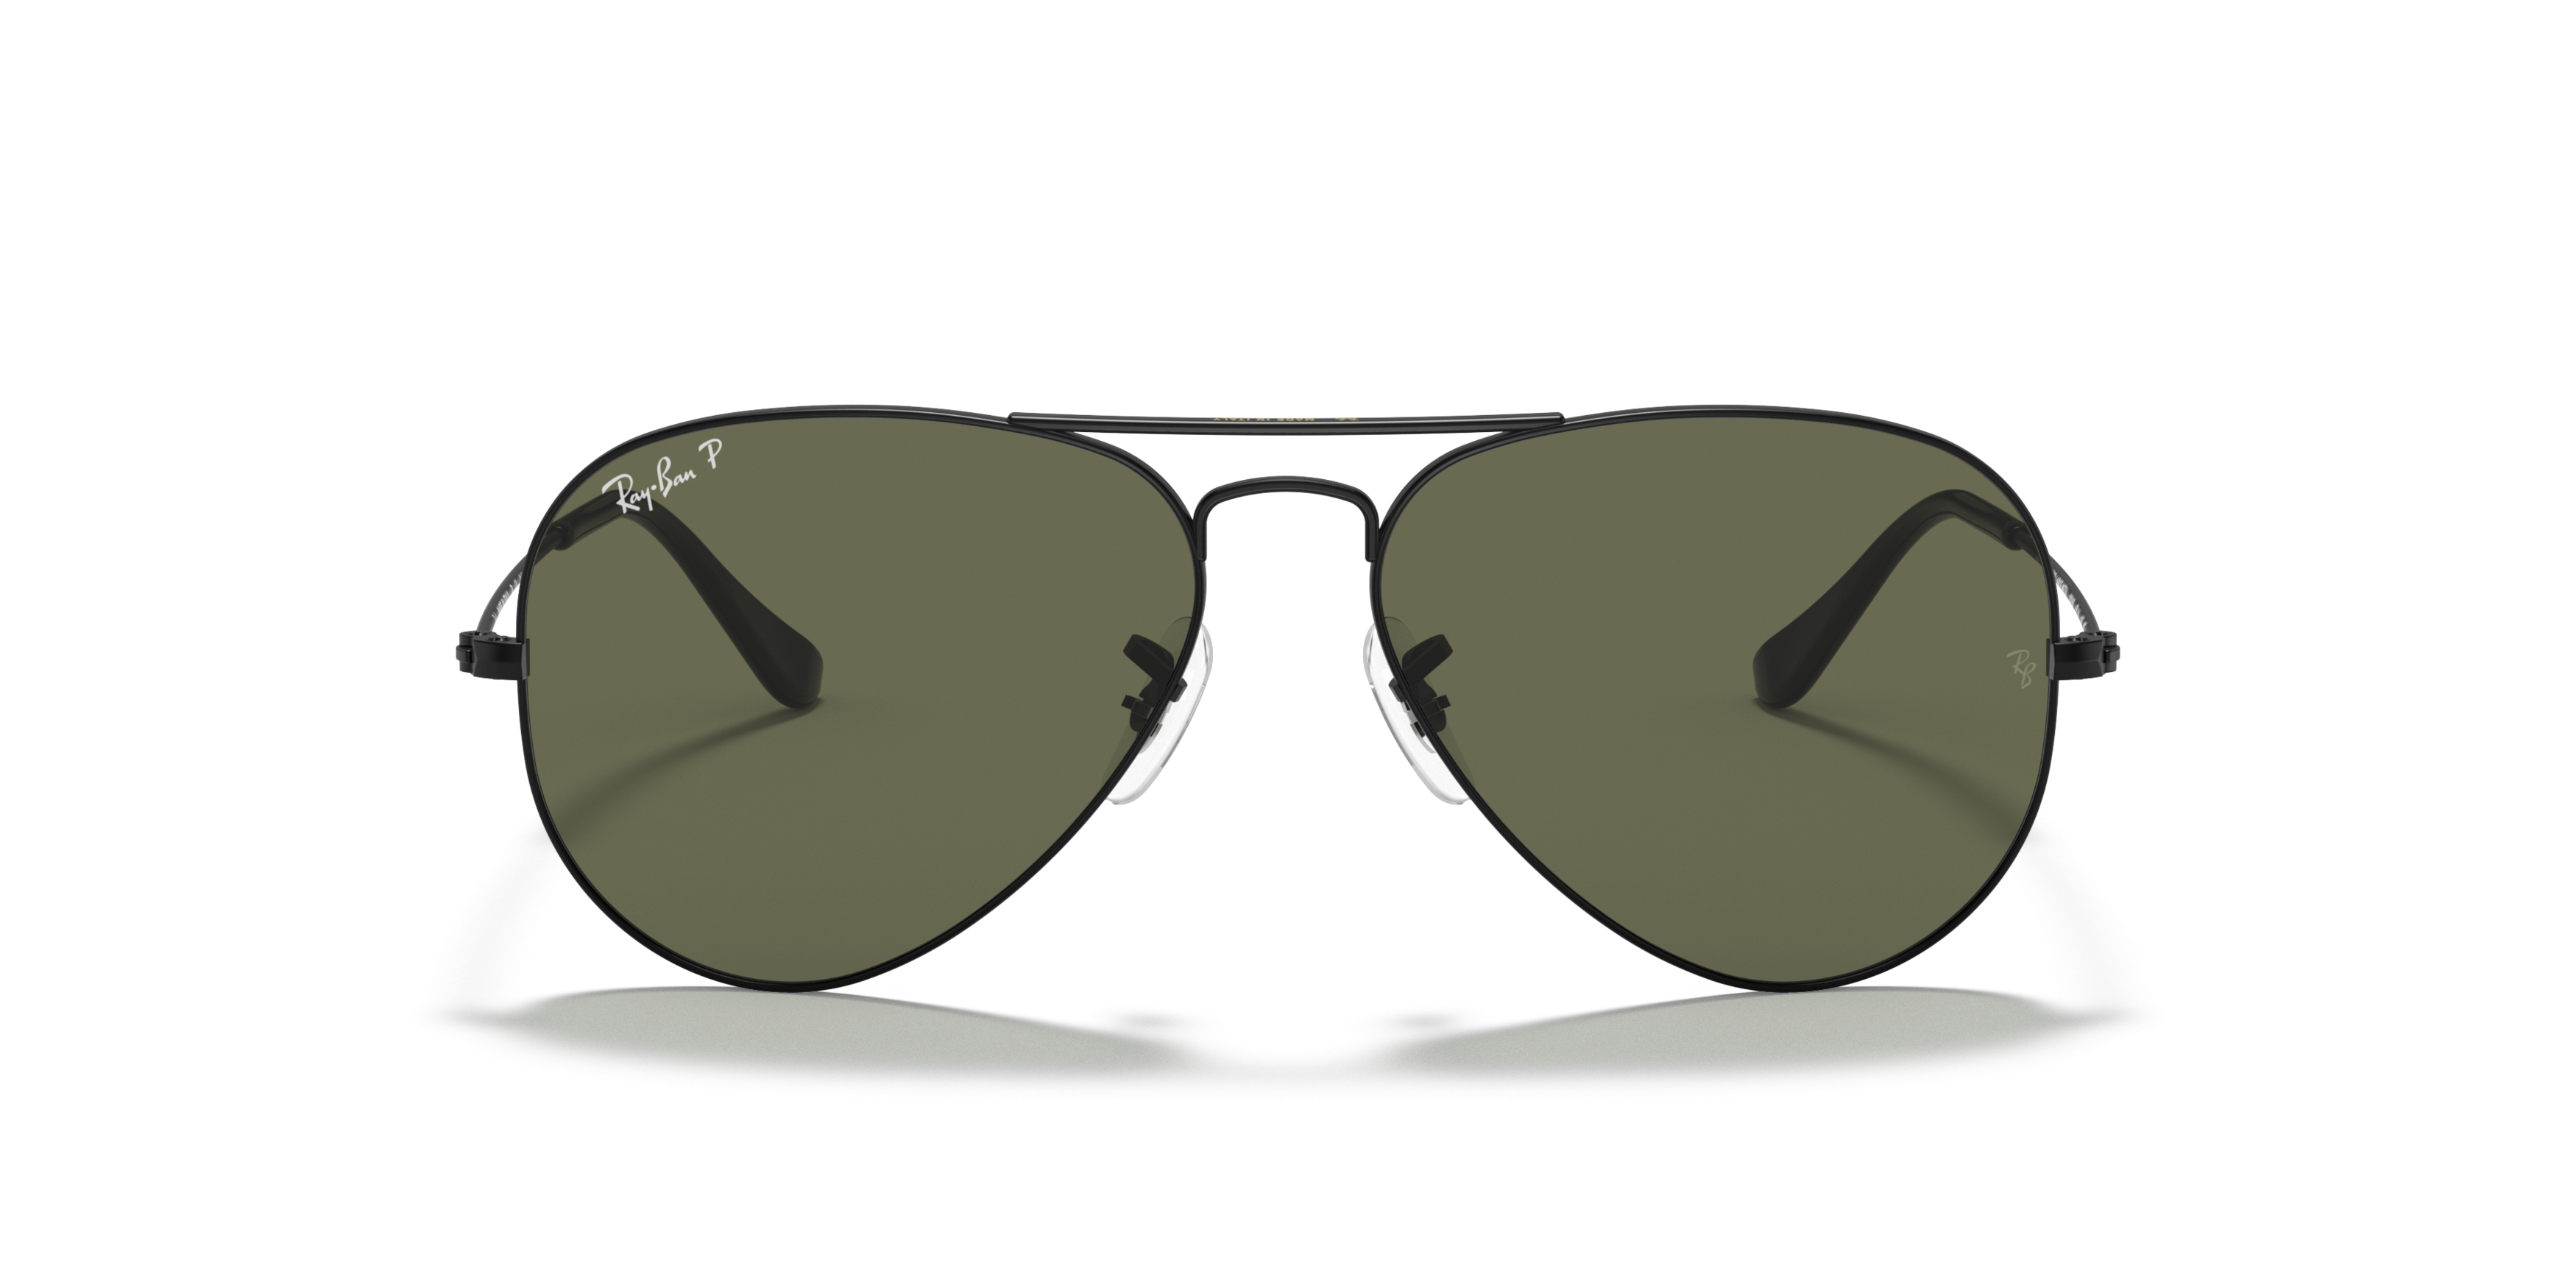 [products.image.front] Ray-Ban Aviator Gradient RB3025 002/58